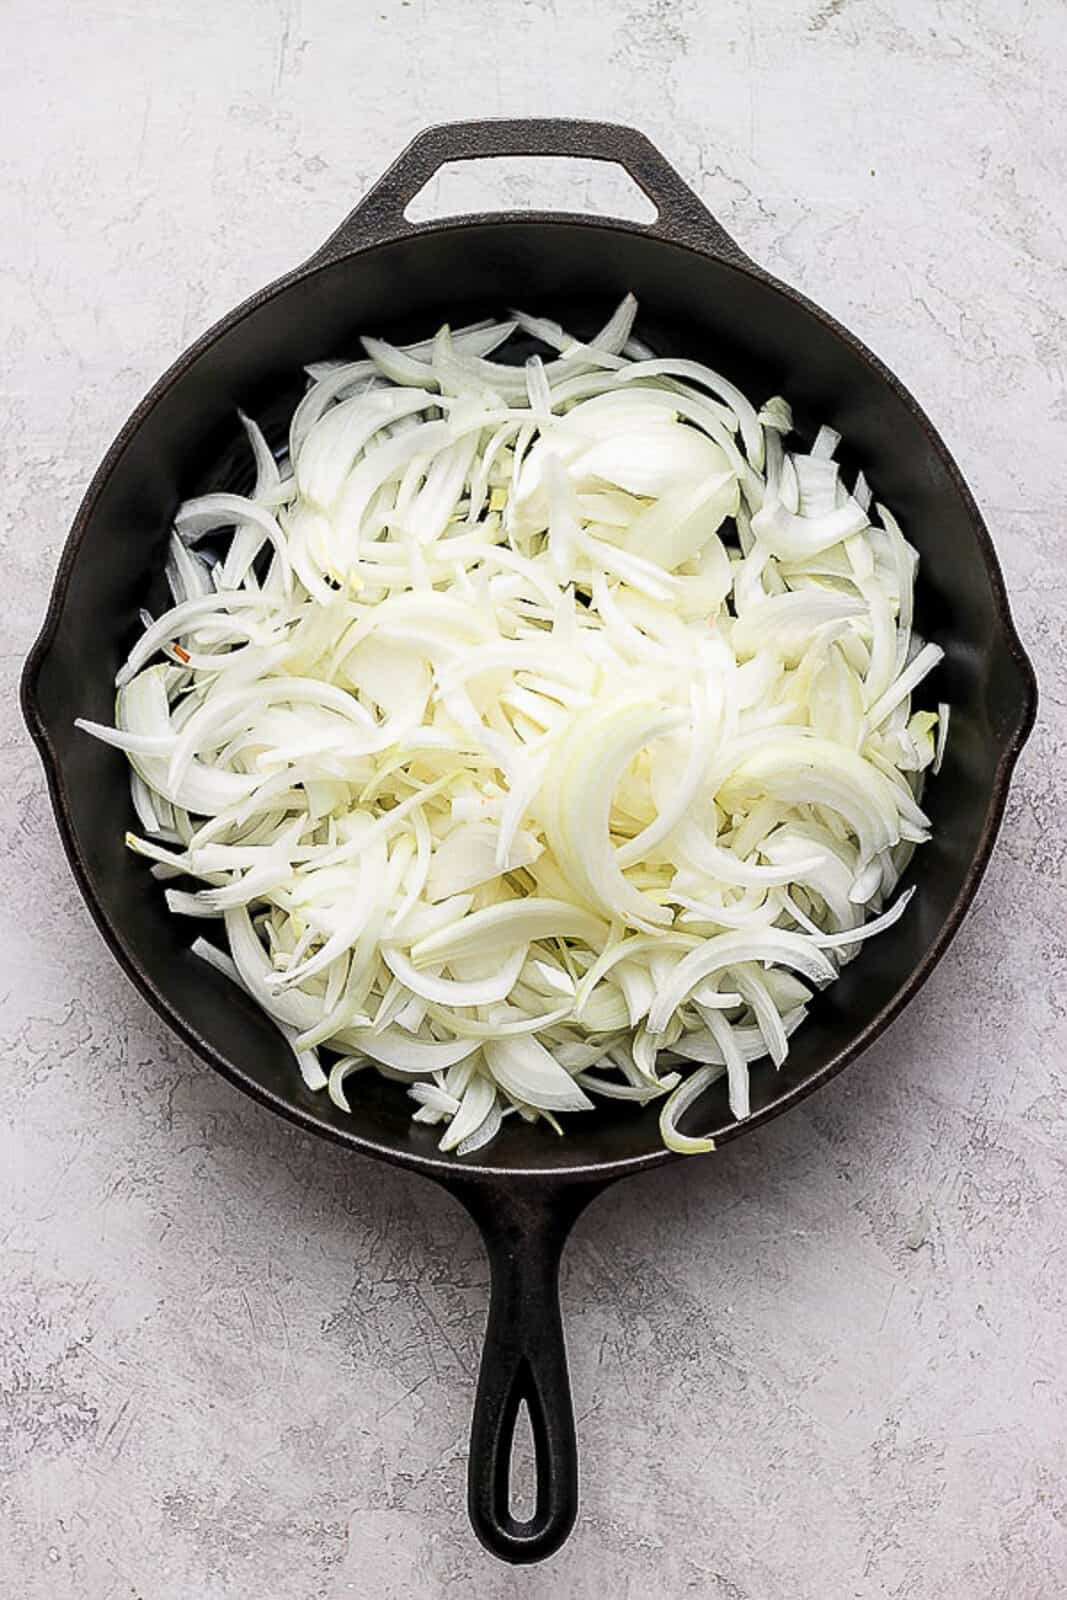 Raw onion slices in a cast iron skillet.